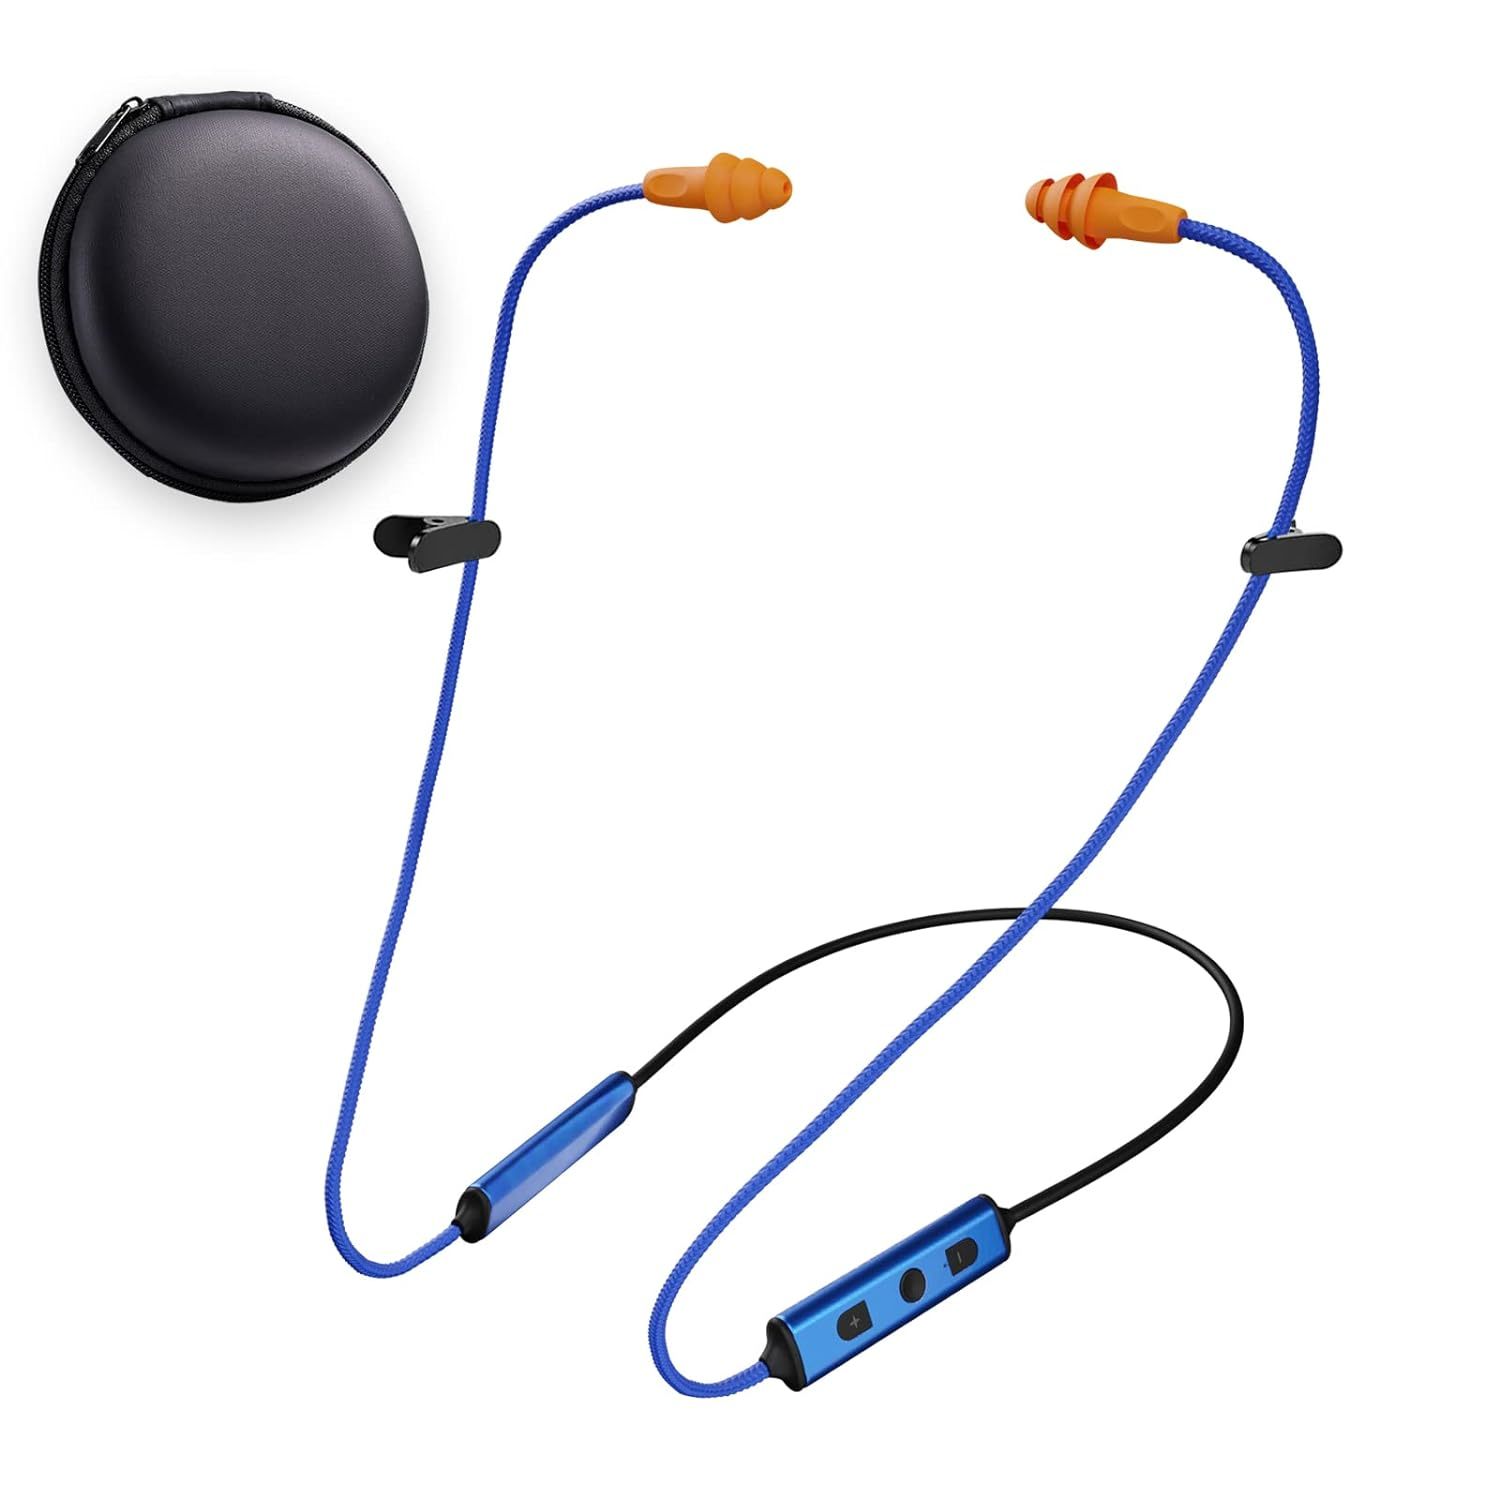 Primary image for Ear Plugs Bluetooth Headphones for Work, Neckband Wireless Earbuds with 20 Hour 